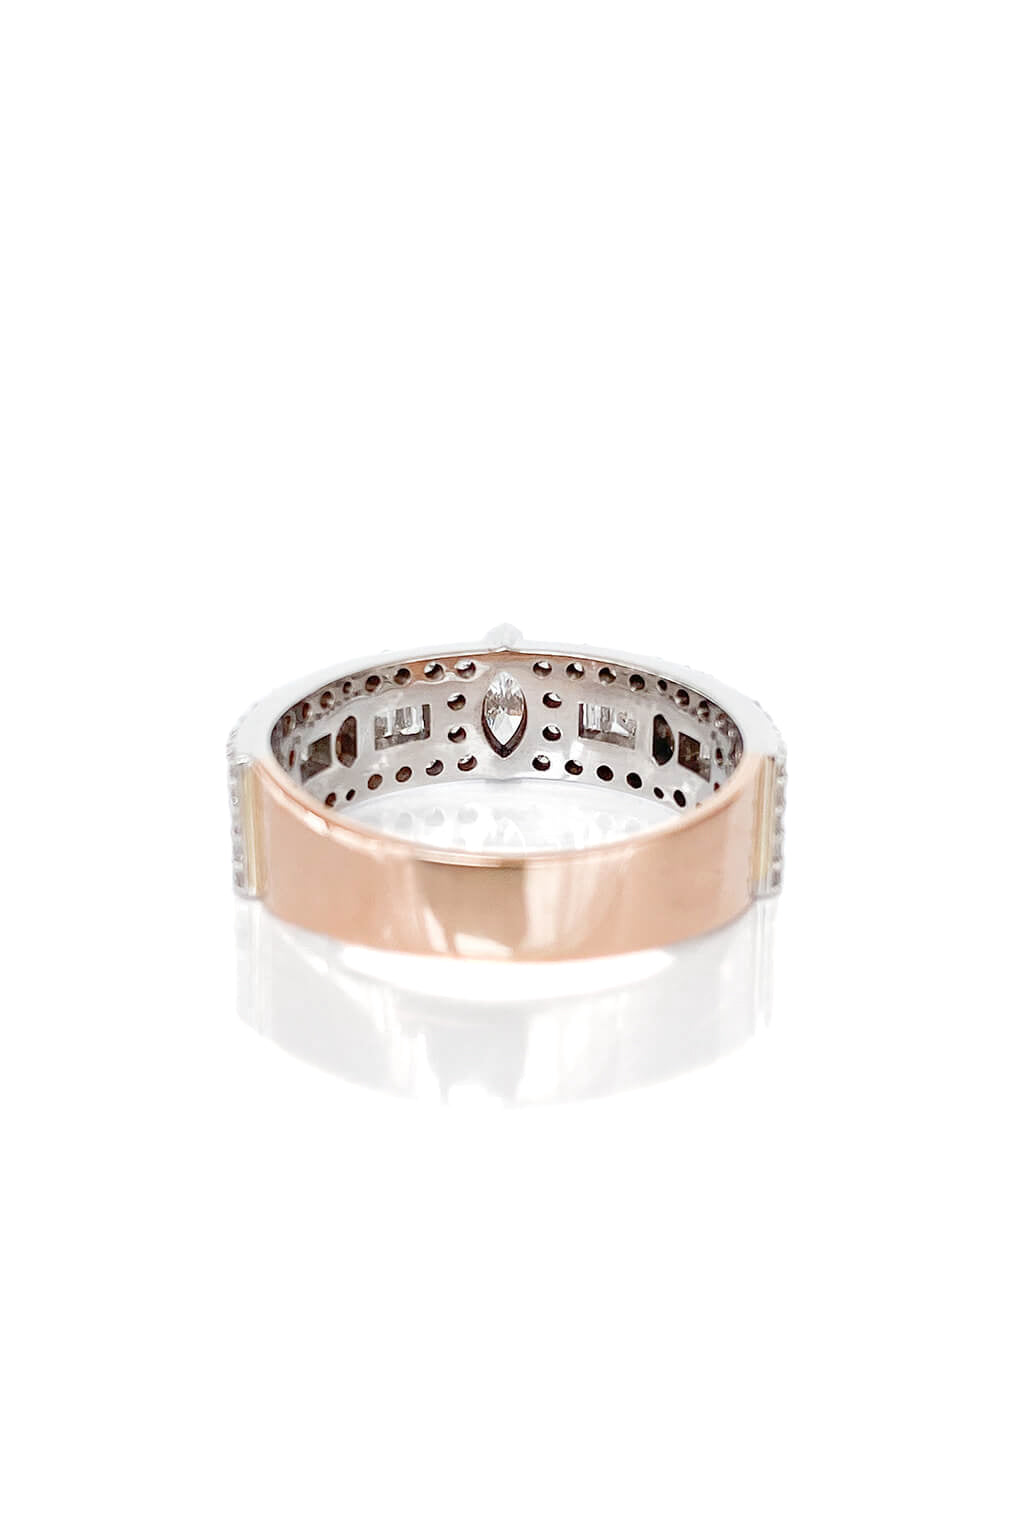 Cartier Love One Diamond Wedding Band Ring 18K Rose Gold Size 50